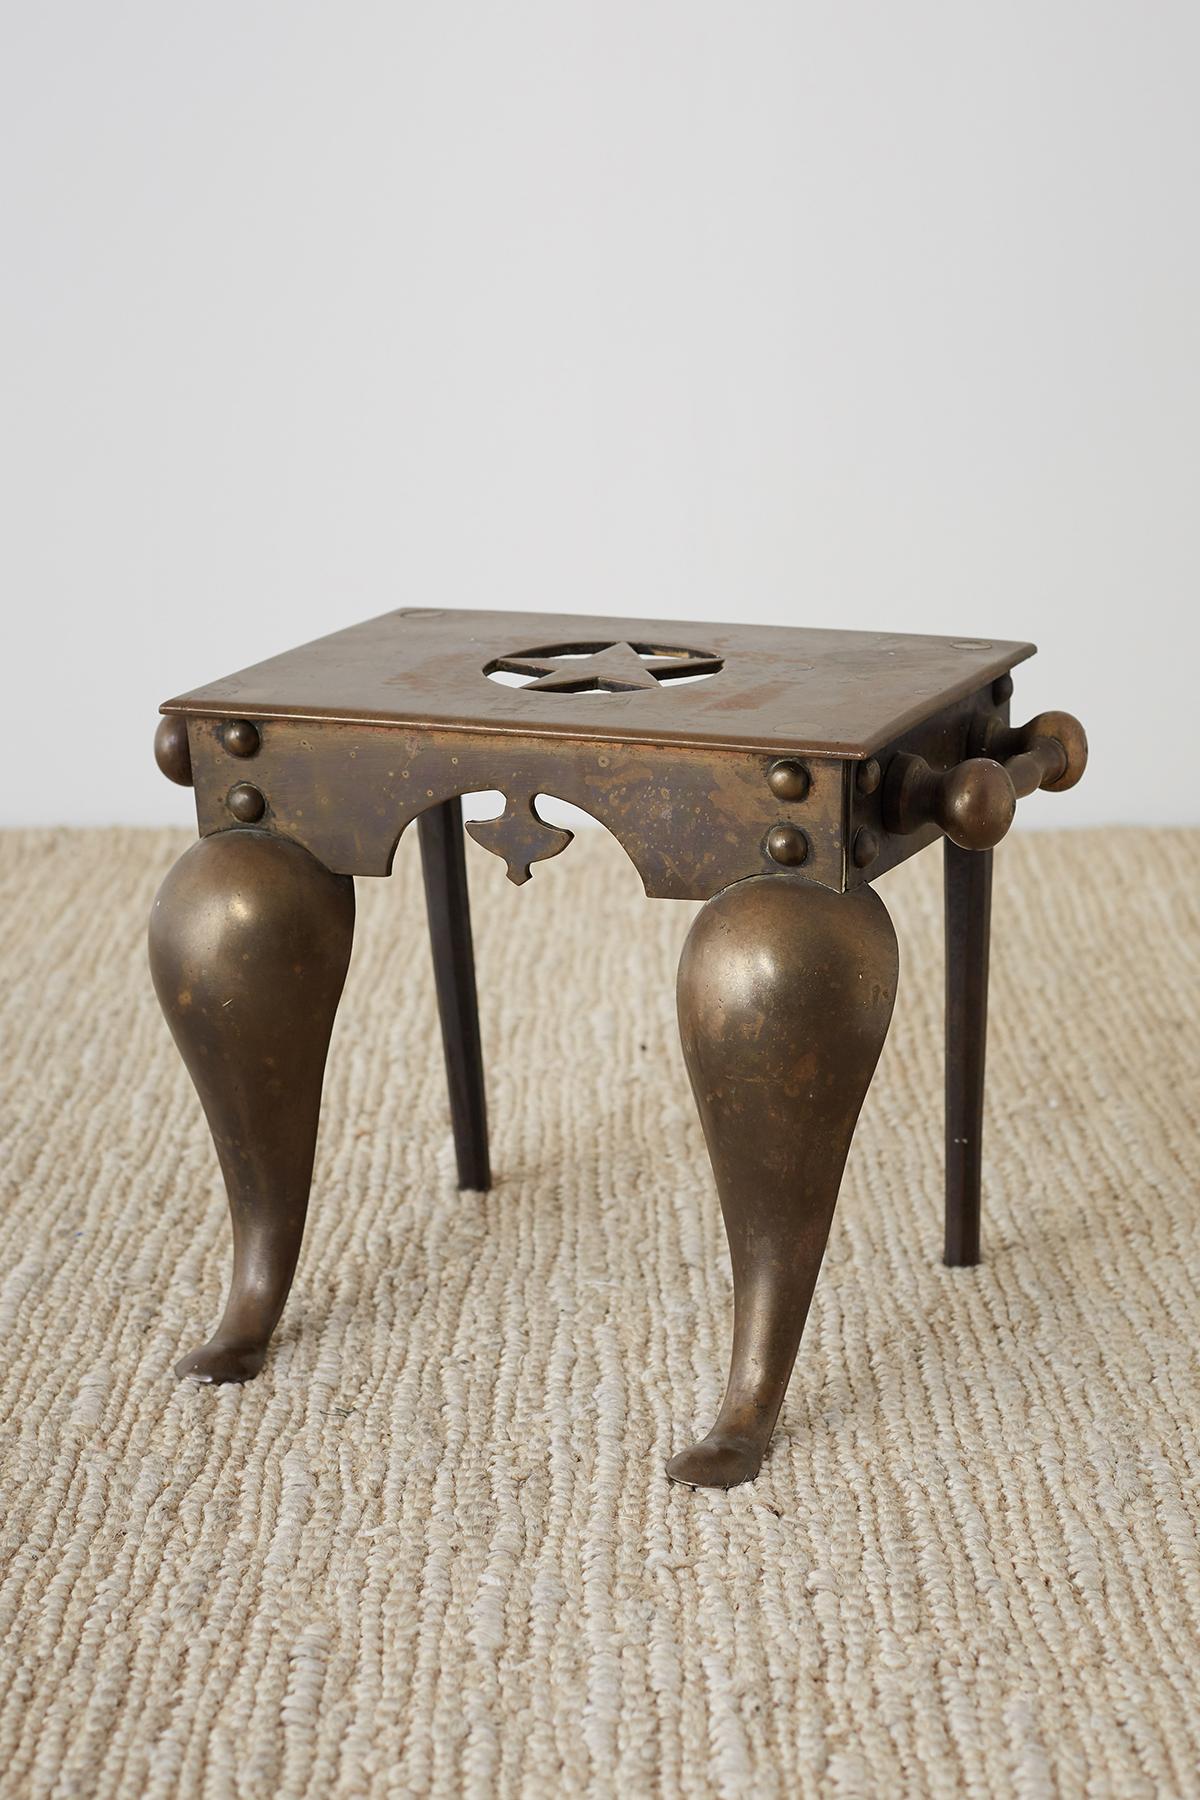 Antique English brass fireplace stool or footman trivet originally used as a Stand for keeping plates warm by a dining room fire. Also known as a hearth stand, fireside trivet, or coach step. Thick construction is very substantial and heavy with